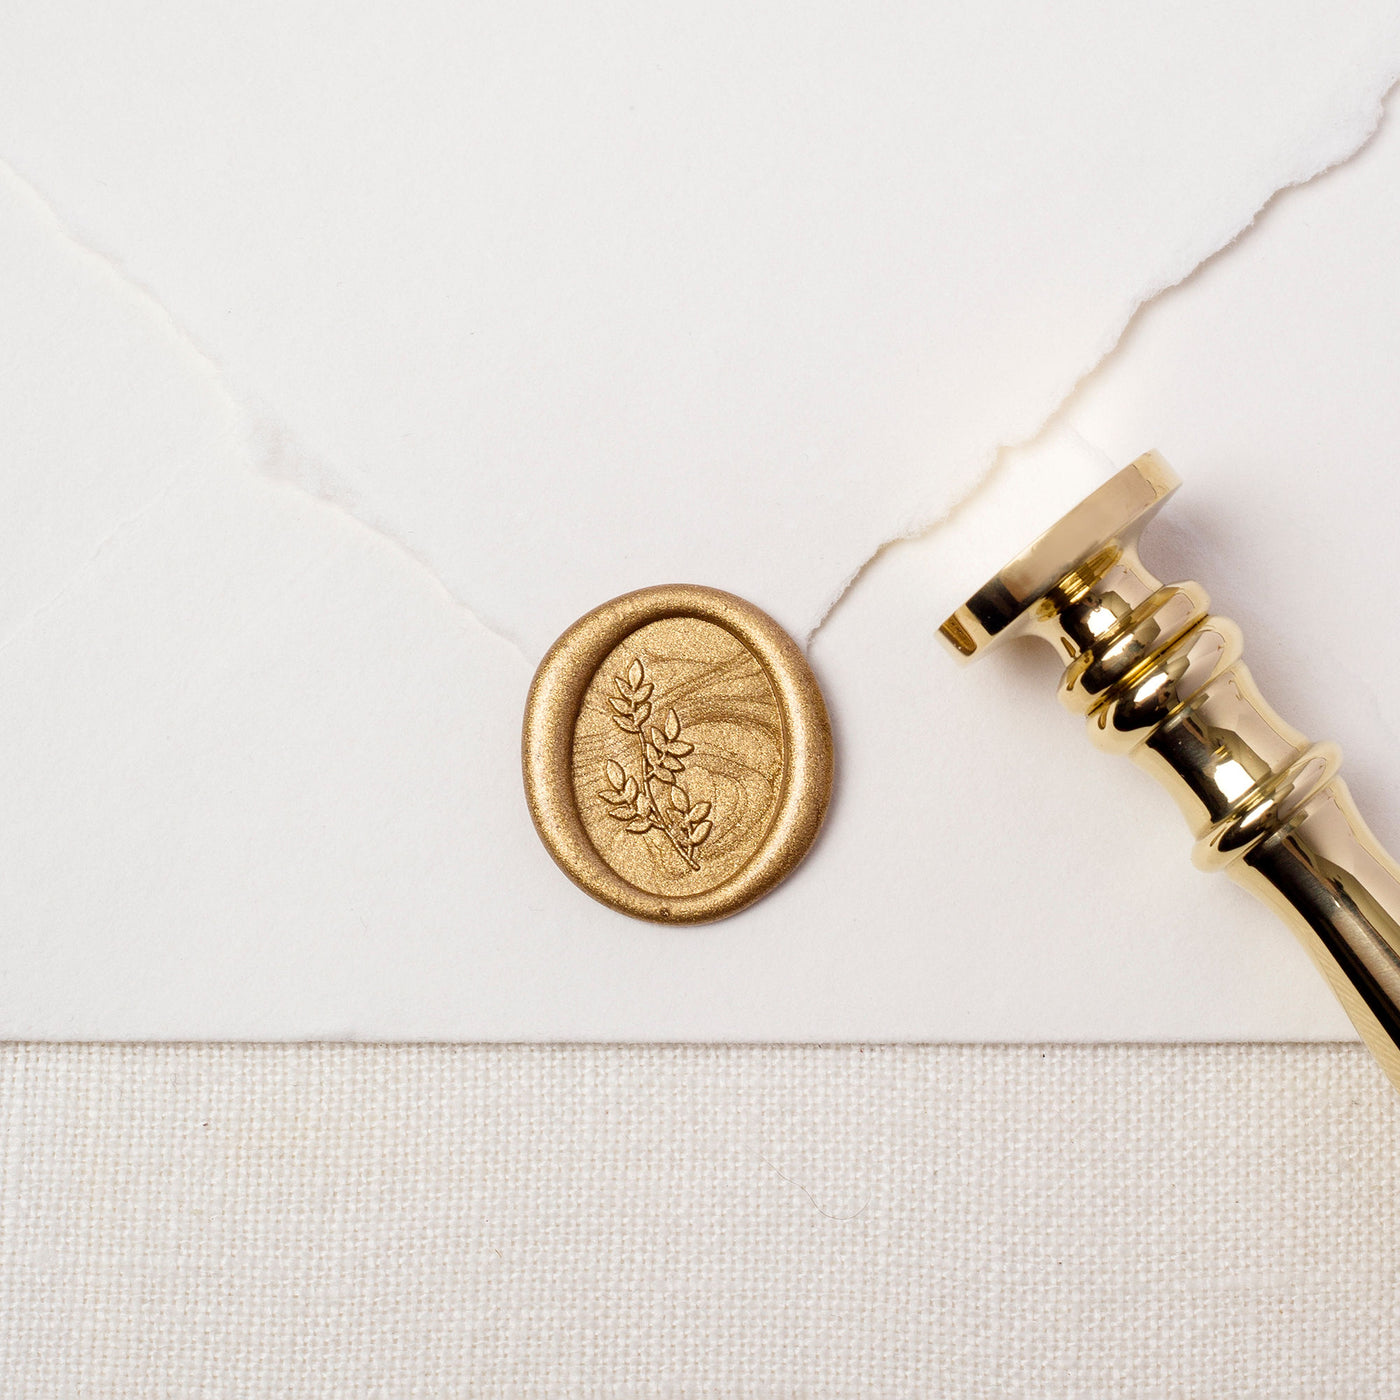 BOTANICAL EMBELLISHMENT OVAL WAX SEAL STAMP - BEATRICE